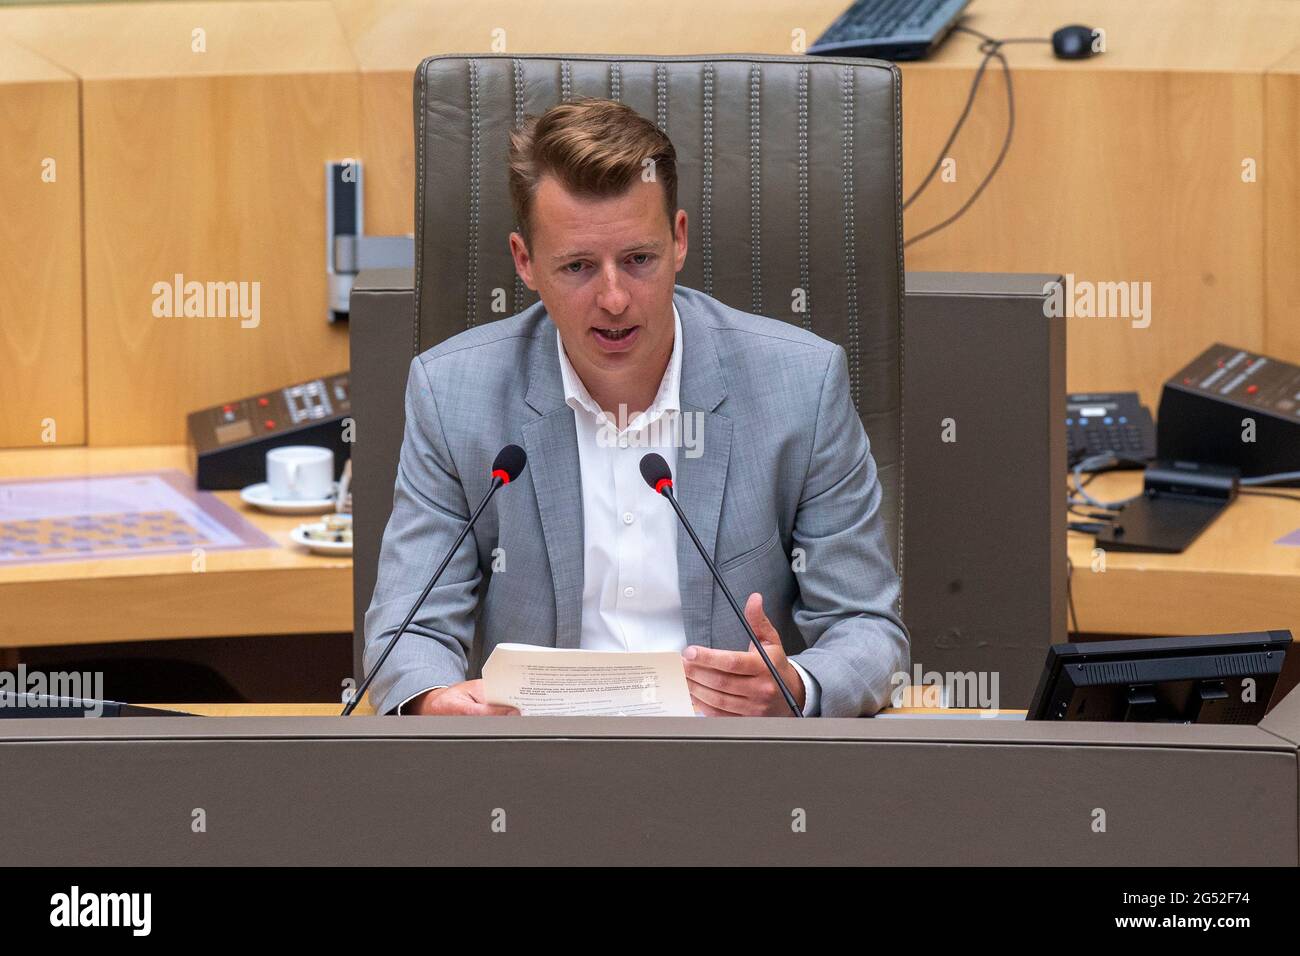 Vooruit's Hannes Anaf pictured during the installation of a reserach commission on the PFAS - PFOS pollutions, in the Flemish Parliament in Brussels, Stock Photo